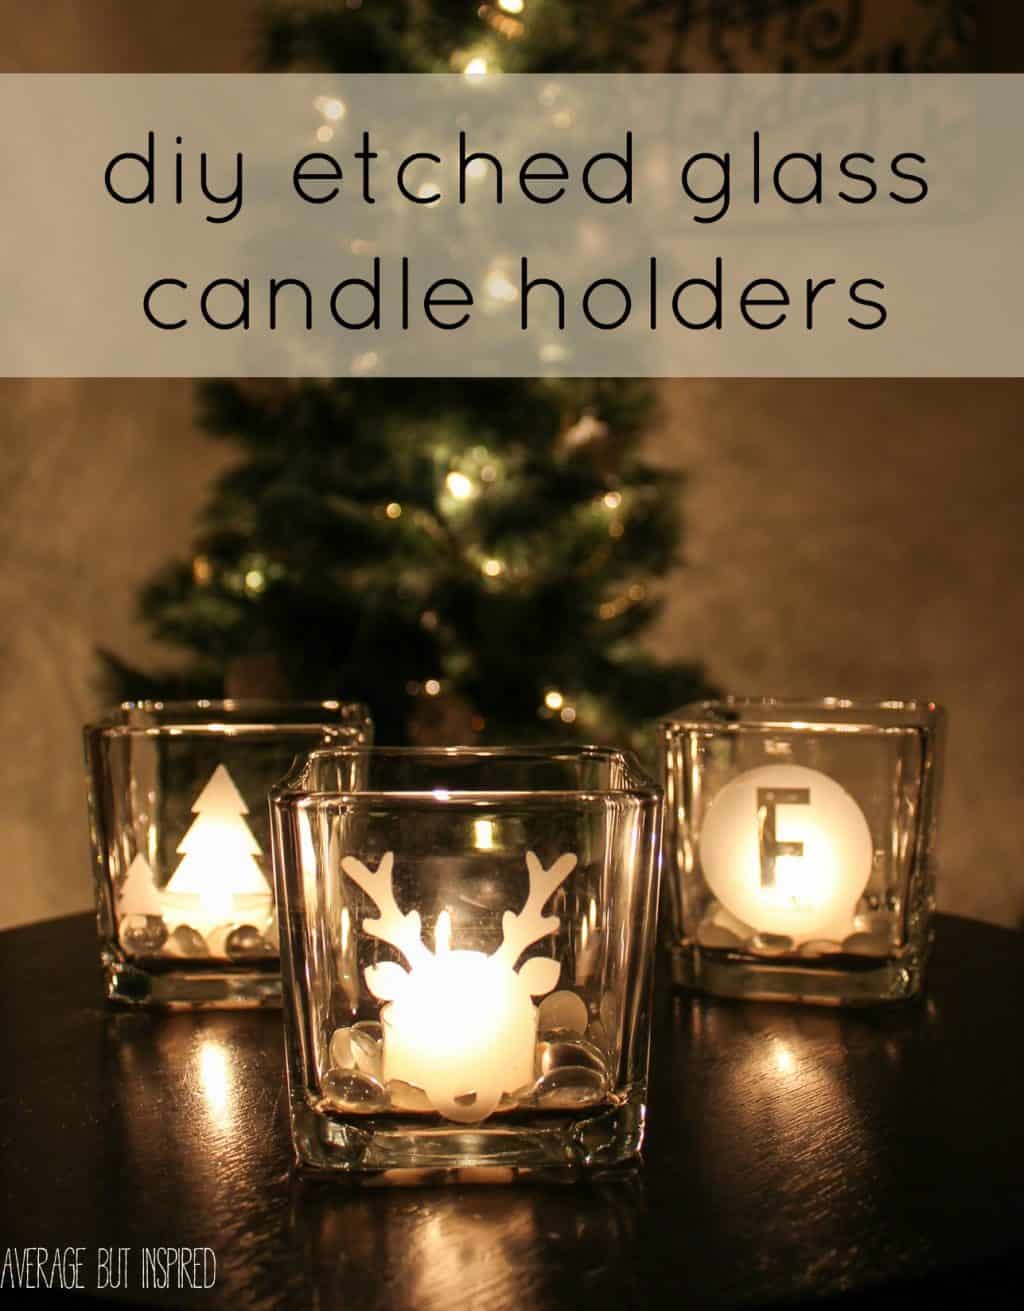 https://averageinspired.com/wp-content/uploads/2015/12/DIY-Etched-Glass-Candle-Holders.jpg